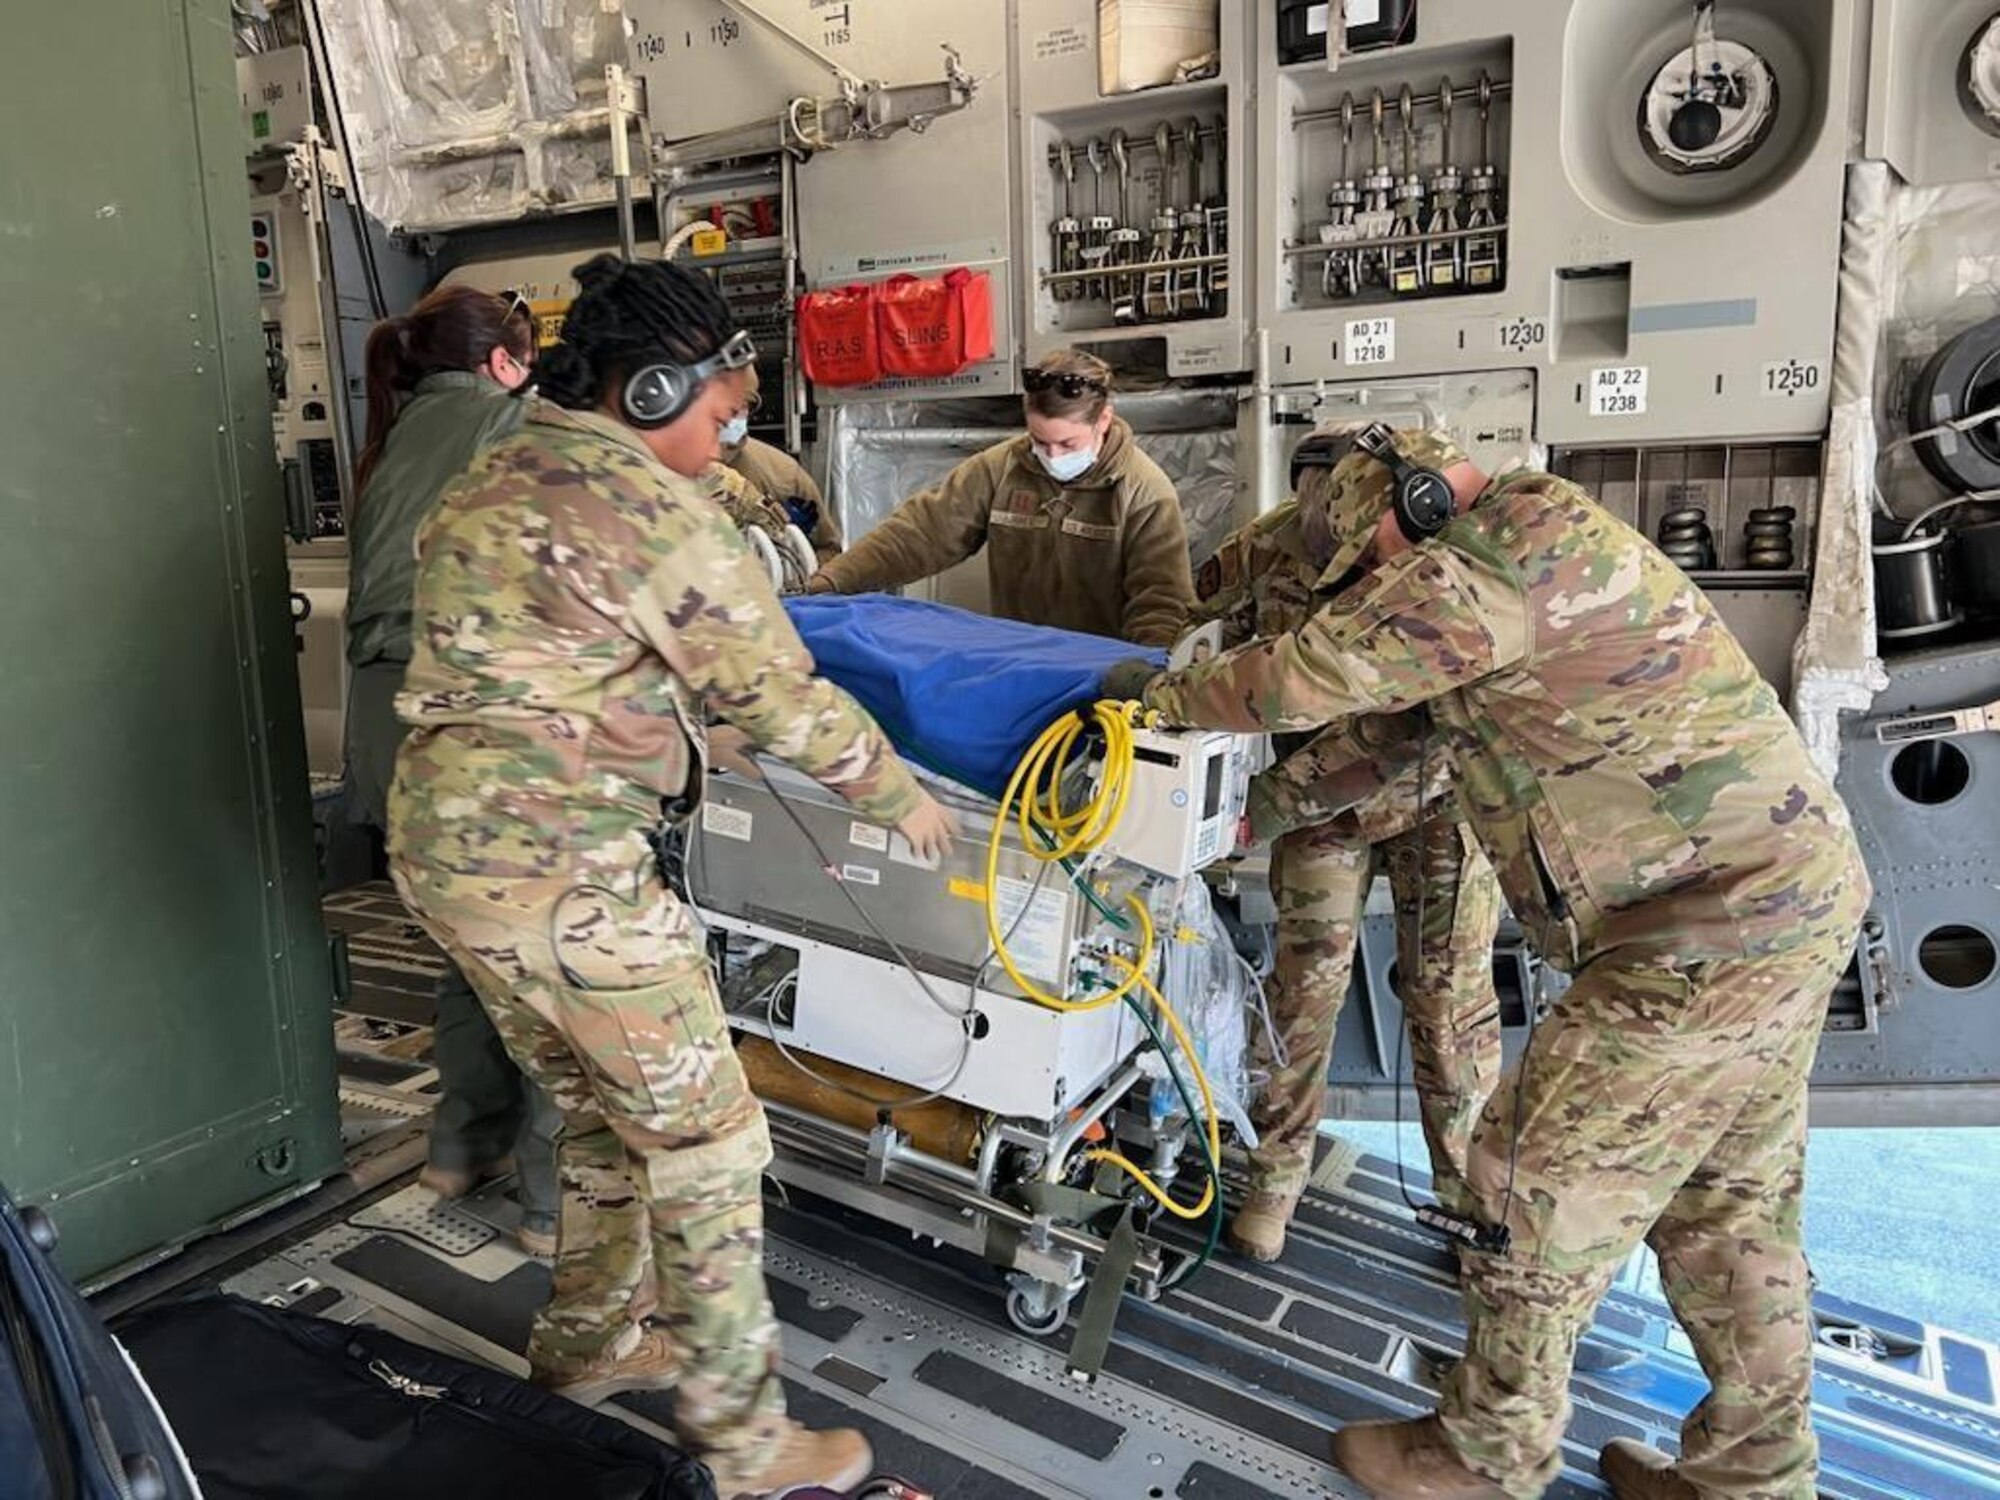 Military members pushing an incubator off of a plane to a waiting ambulance